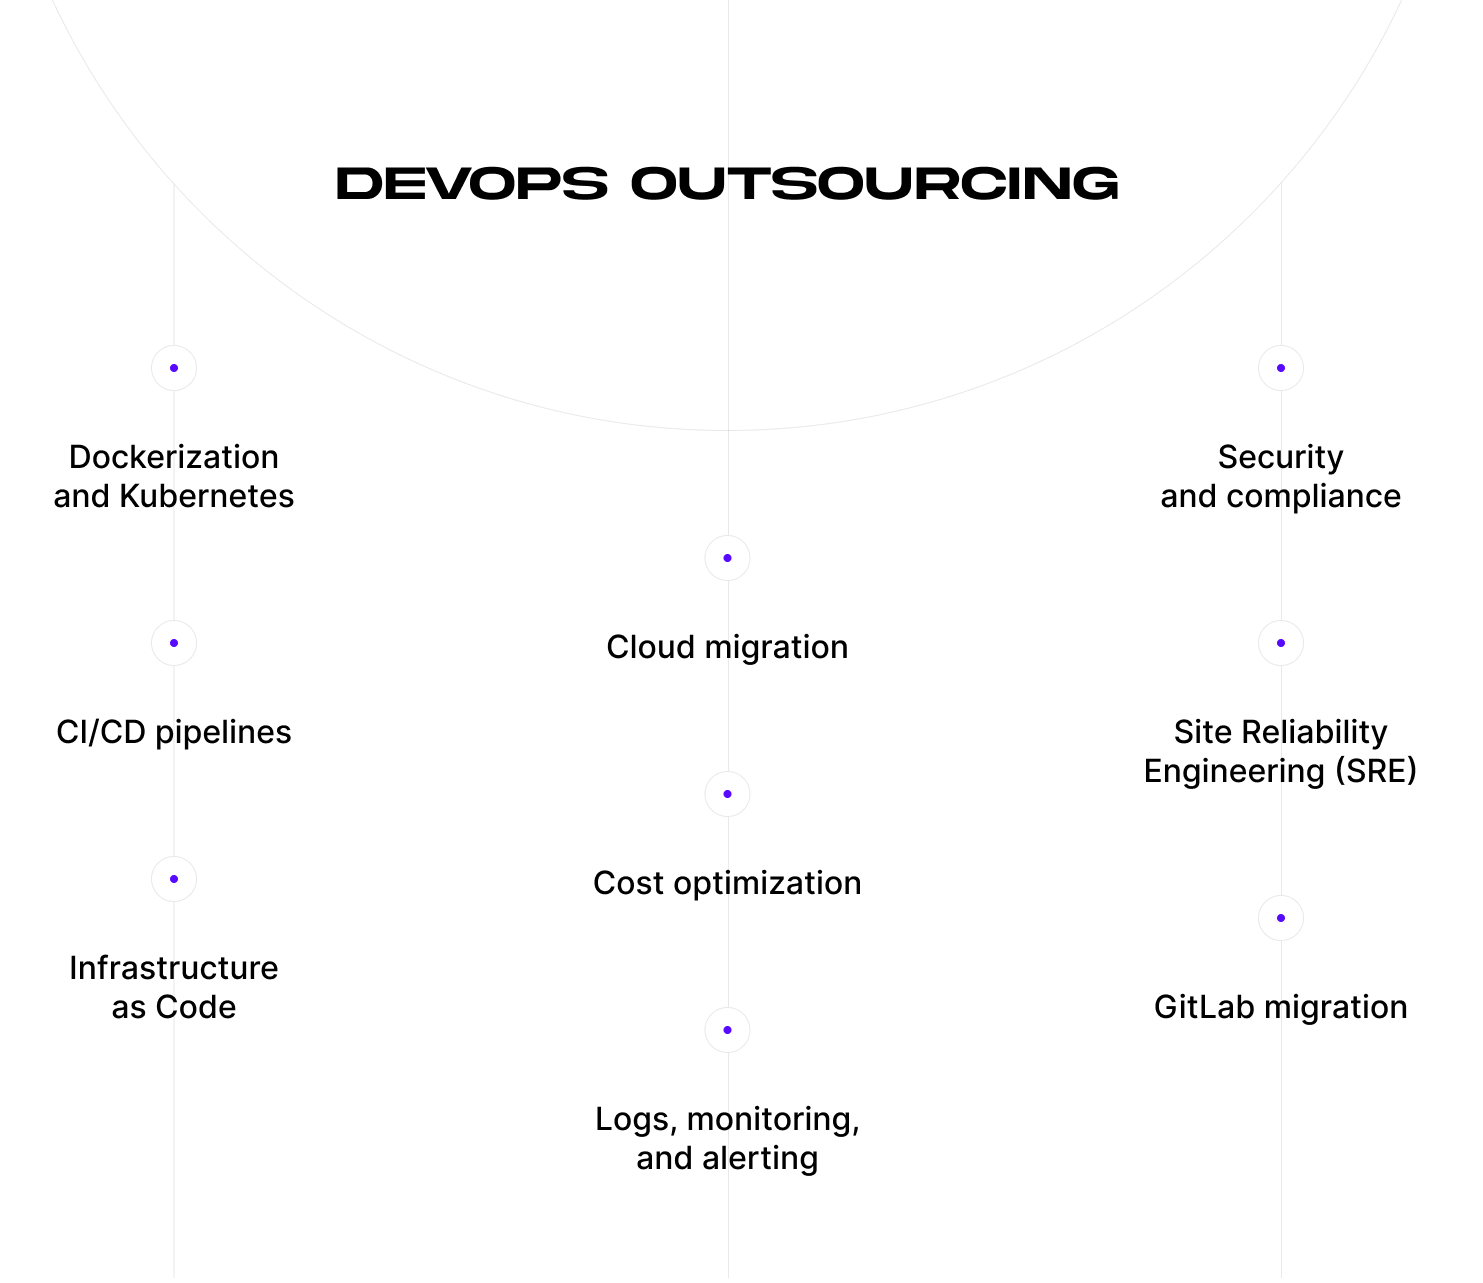 A list of DevOps outsourcing services you can request from a vendor